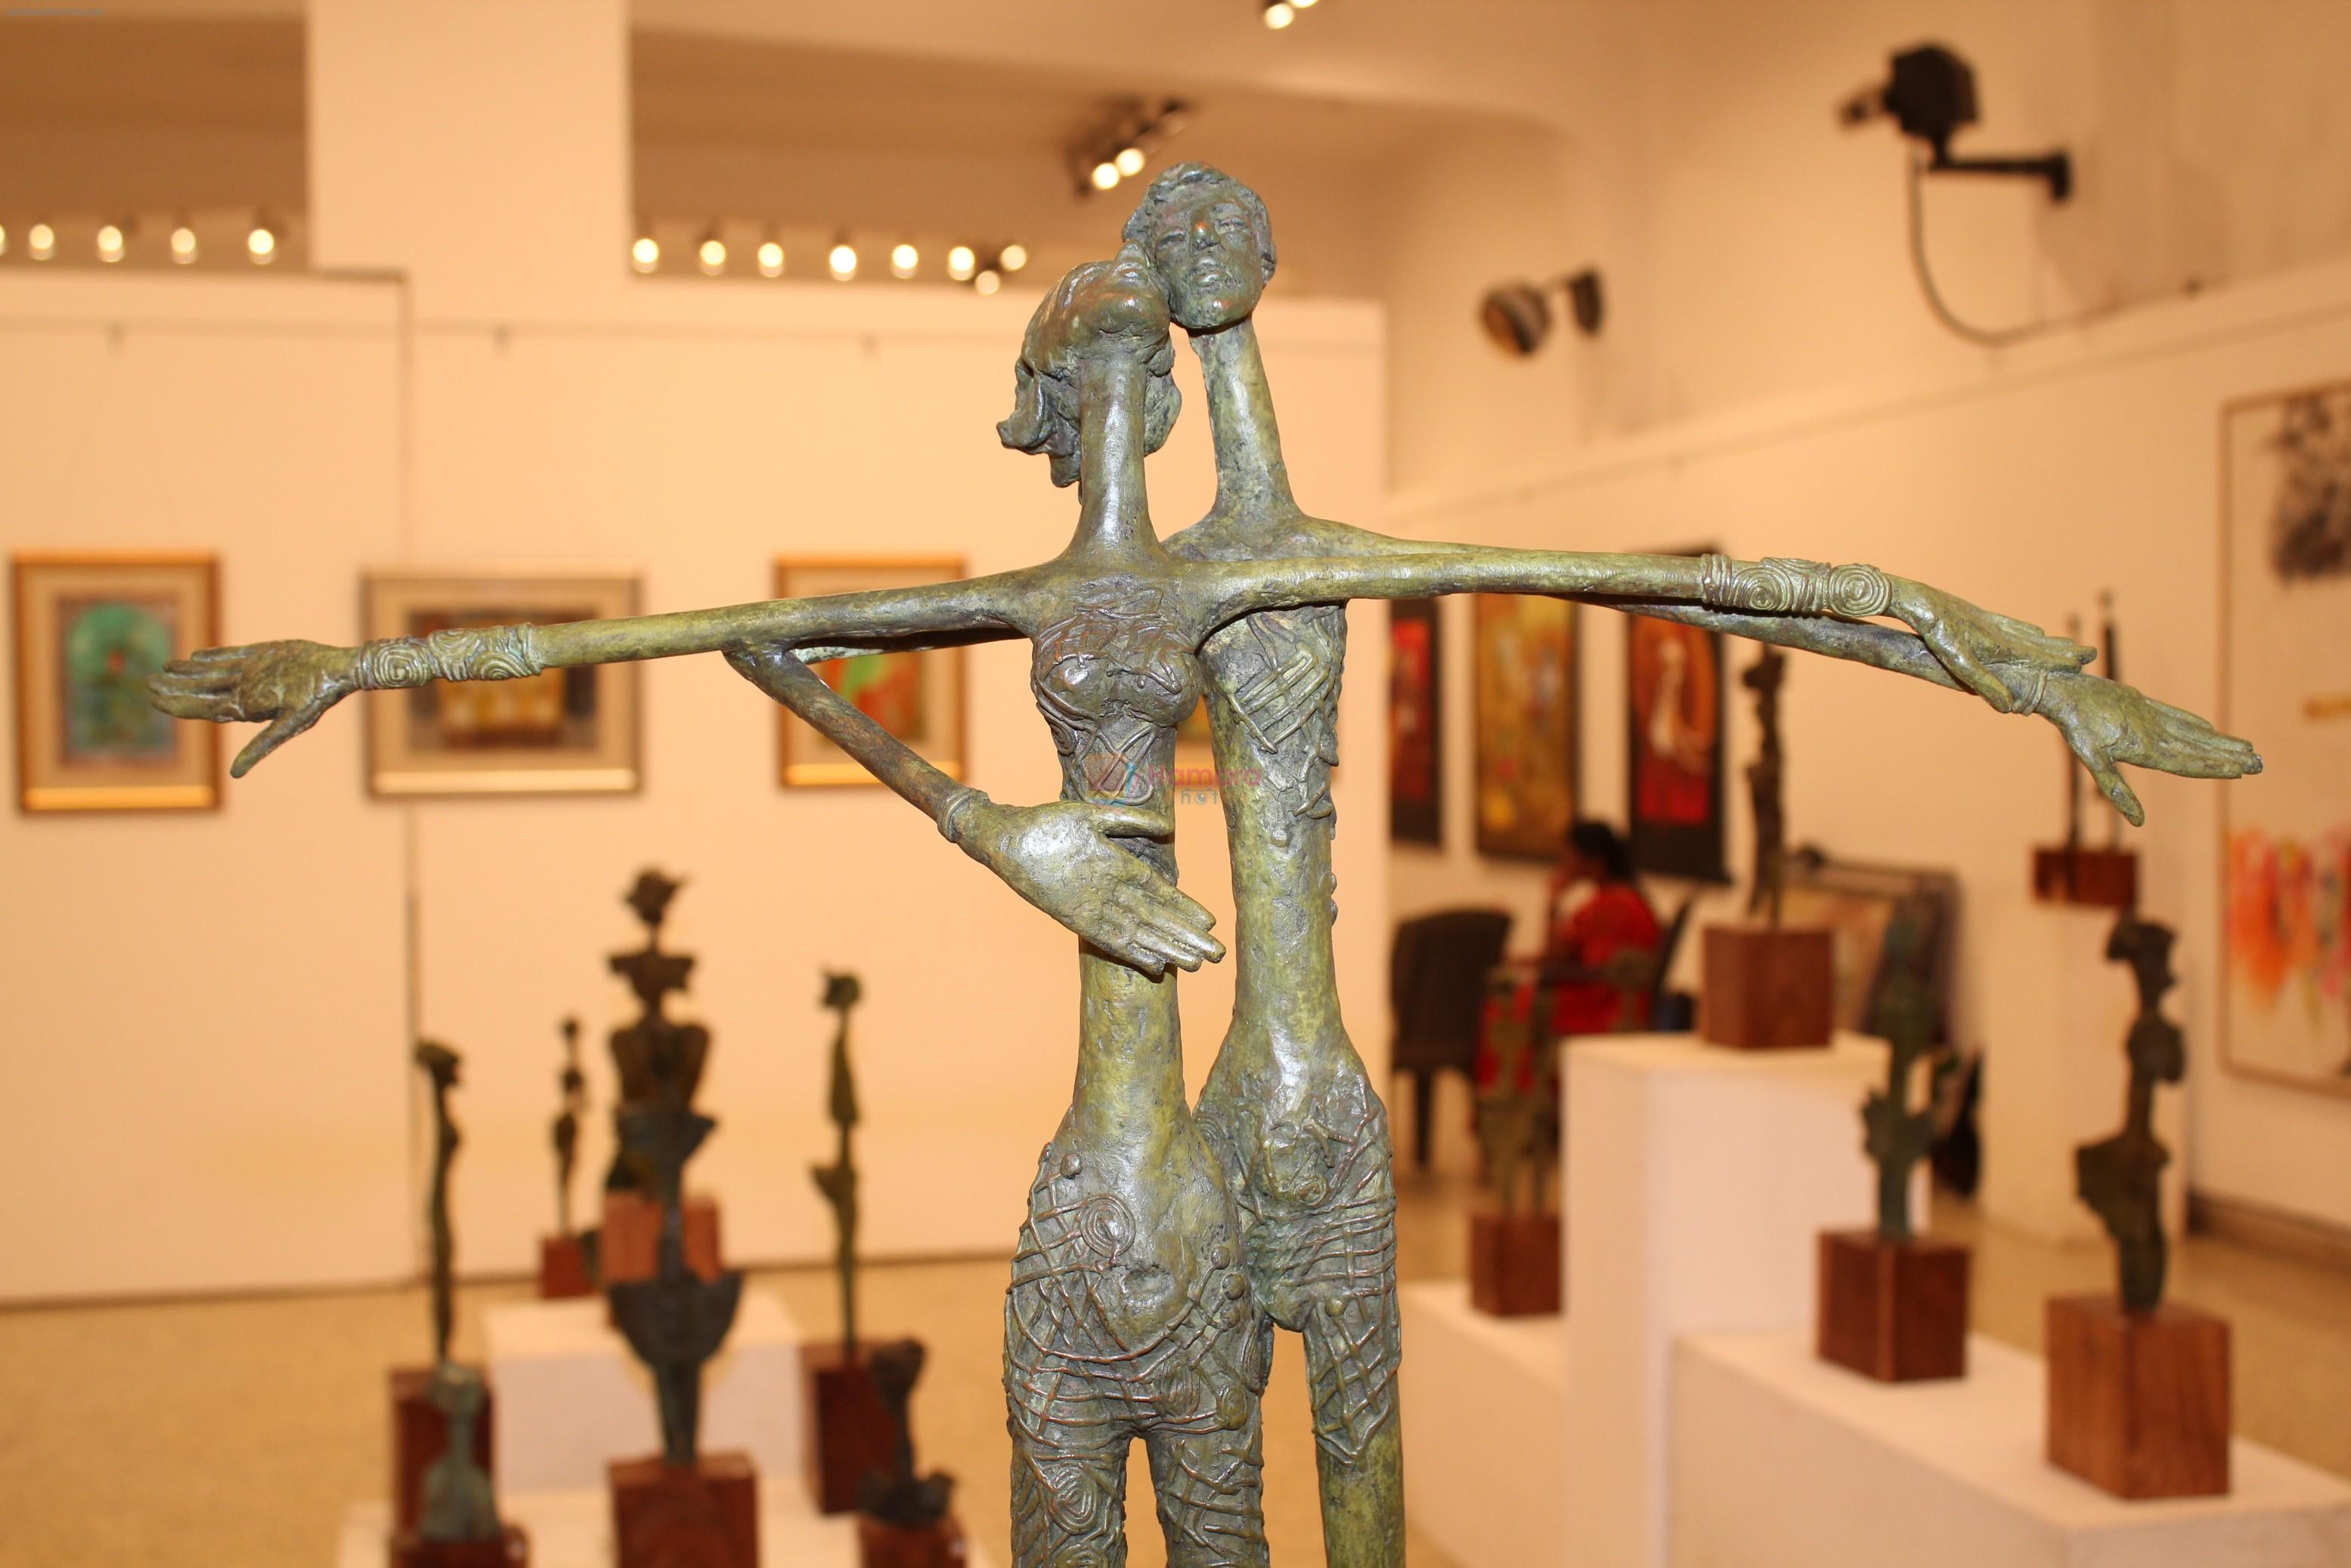 at Rejuvenation 2012 An exhibition of Sculptures by Basudeb Biswas & Paintings by Subroto Mandal in Jahangir Art Gallery on 9th May 2012